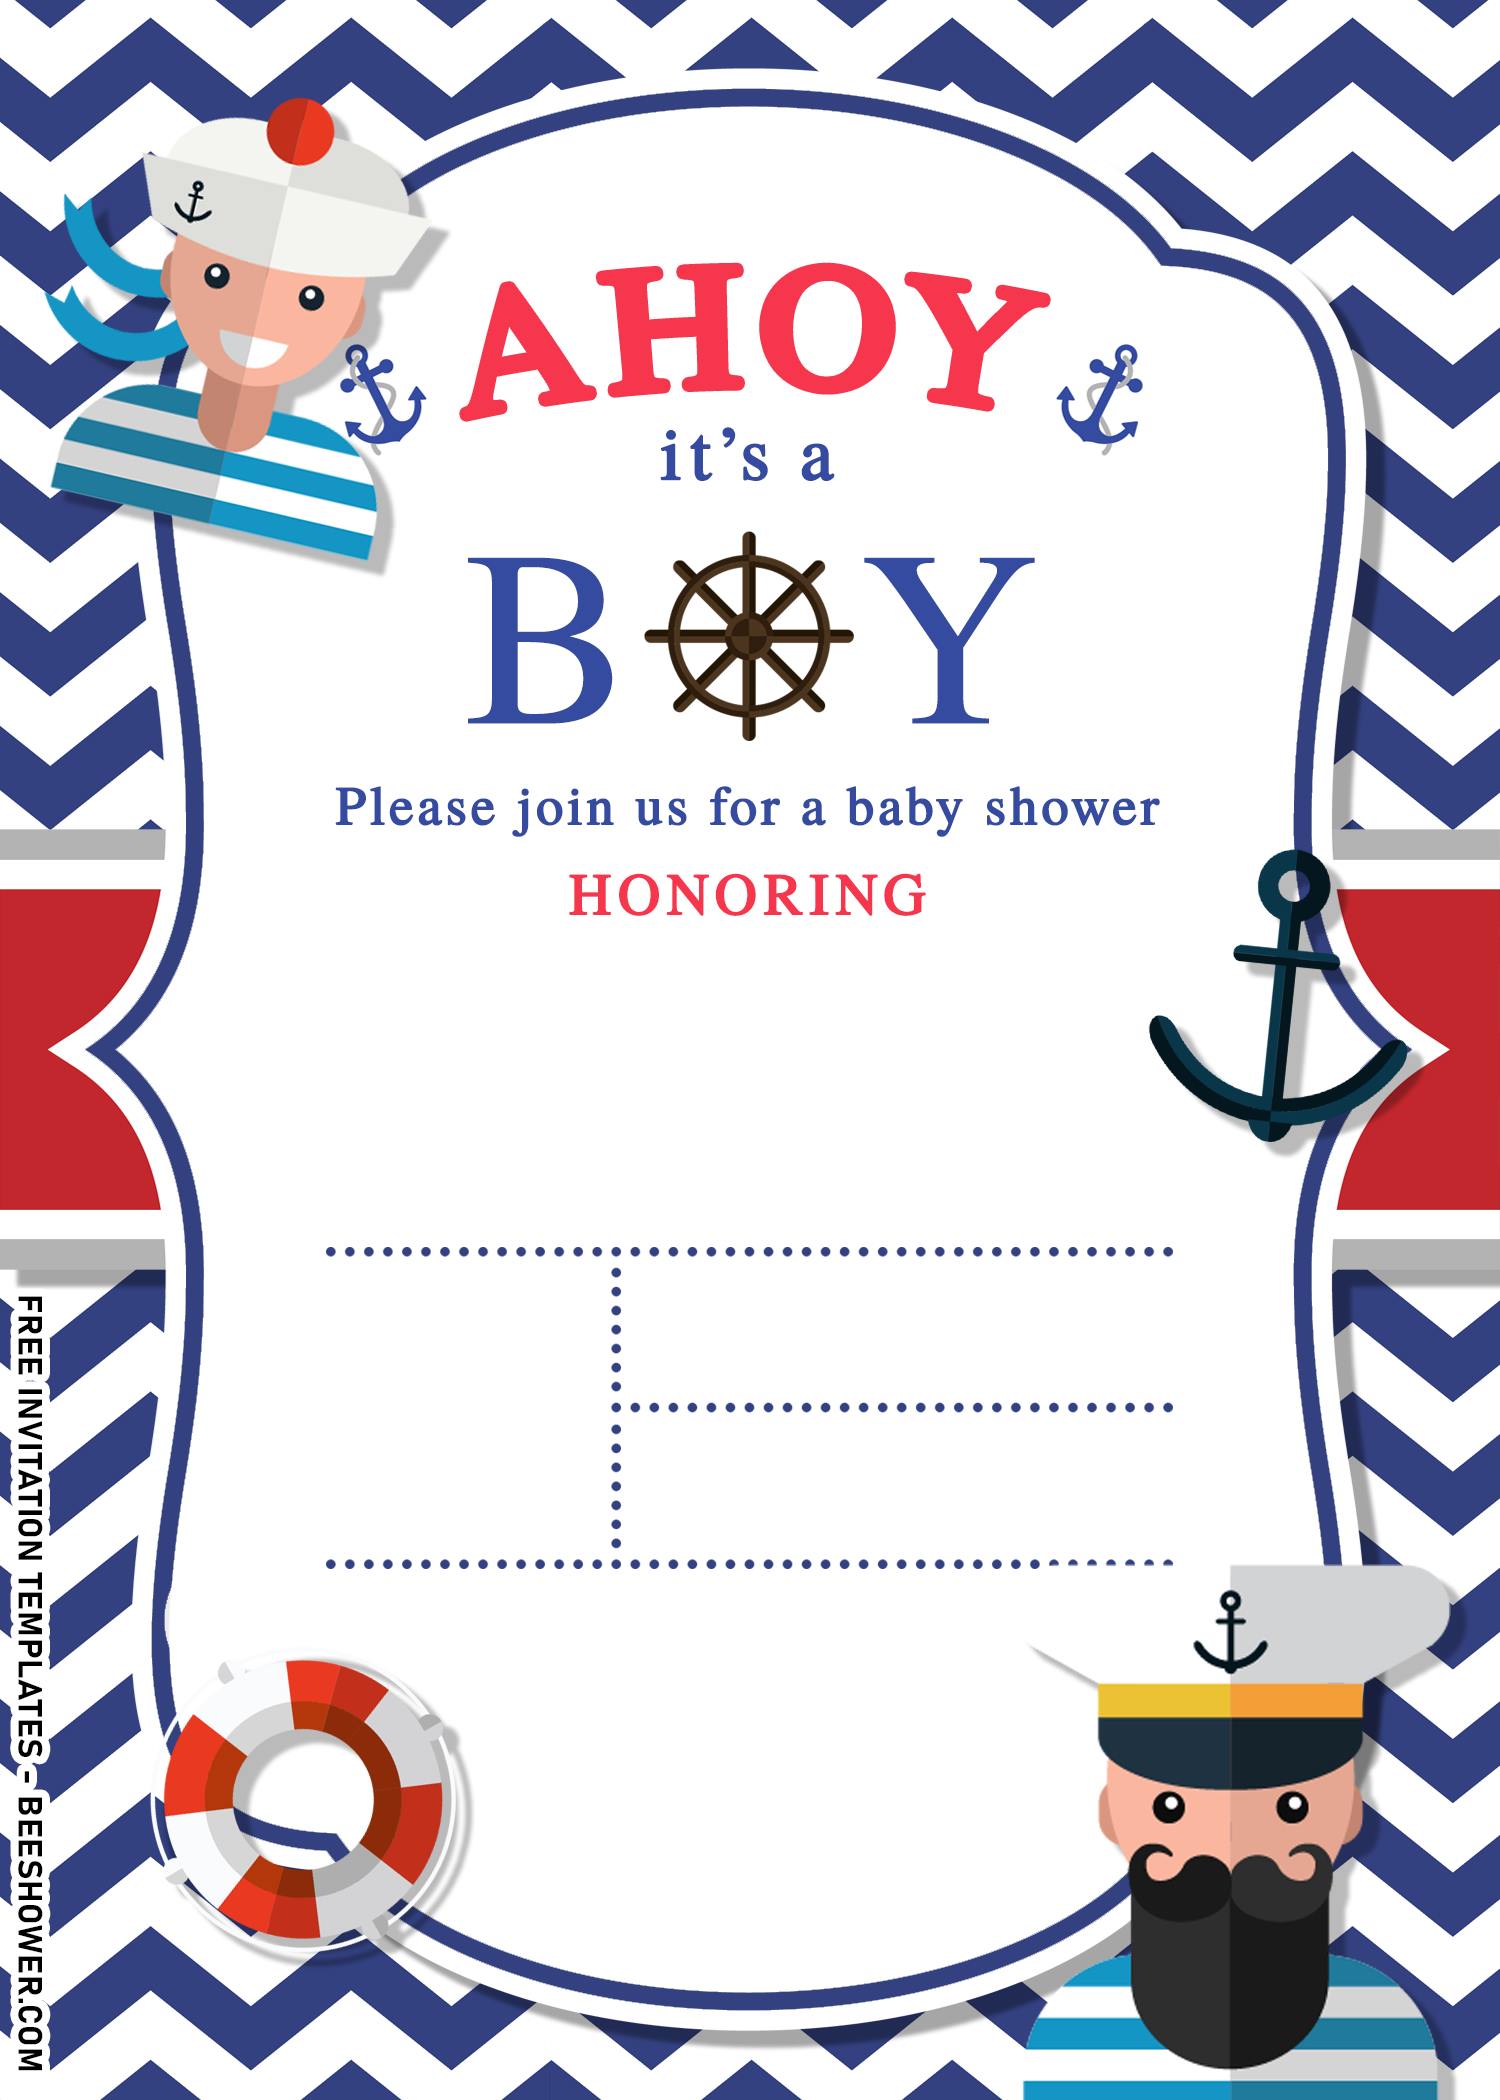 11+ Nautical Themed Birthday Invitation Templates For Your Kid’s Birthday Bash and has Pirate